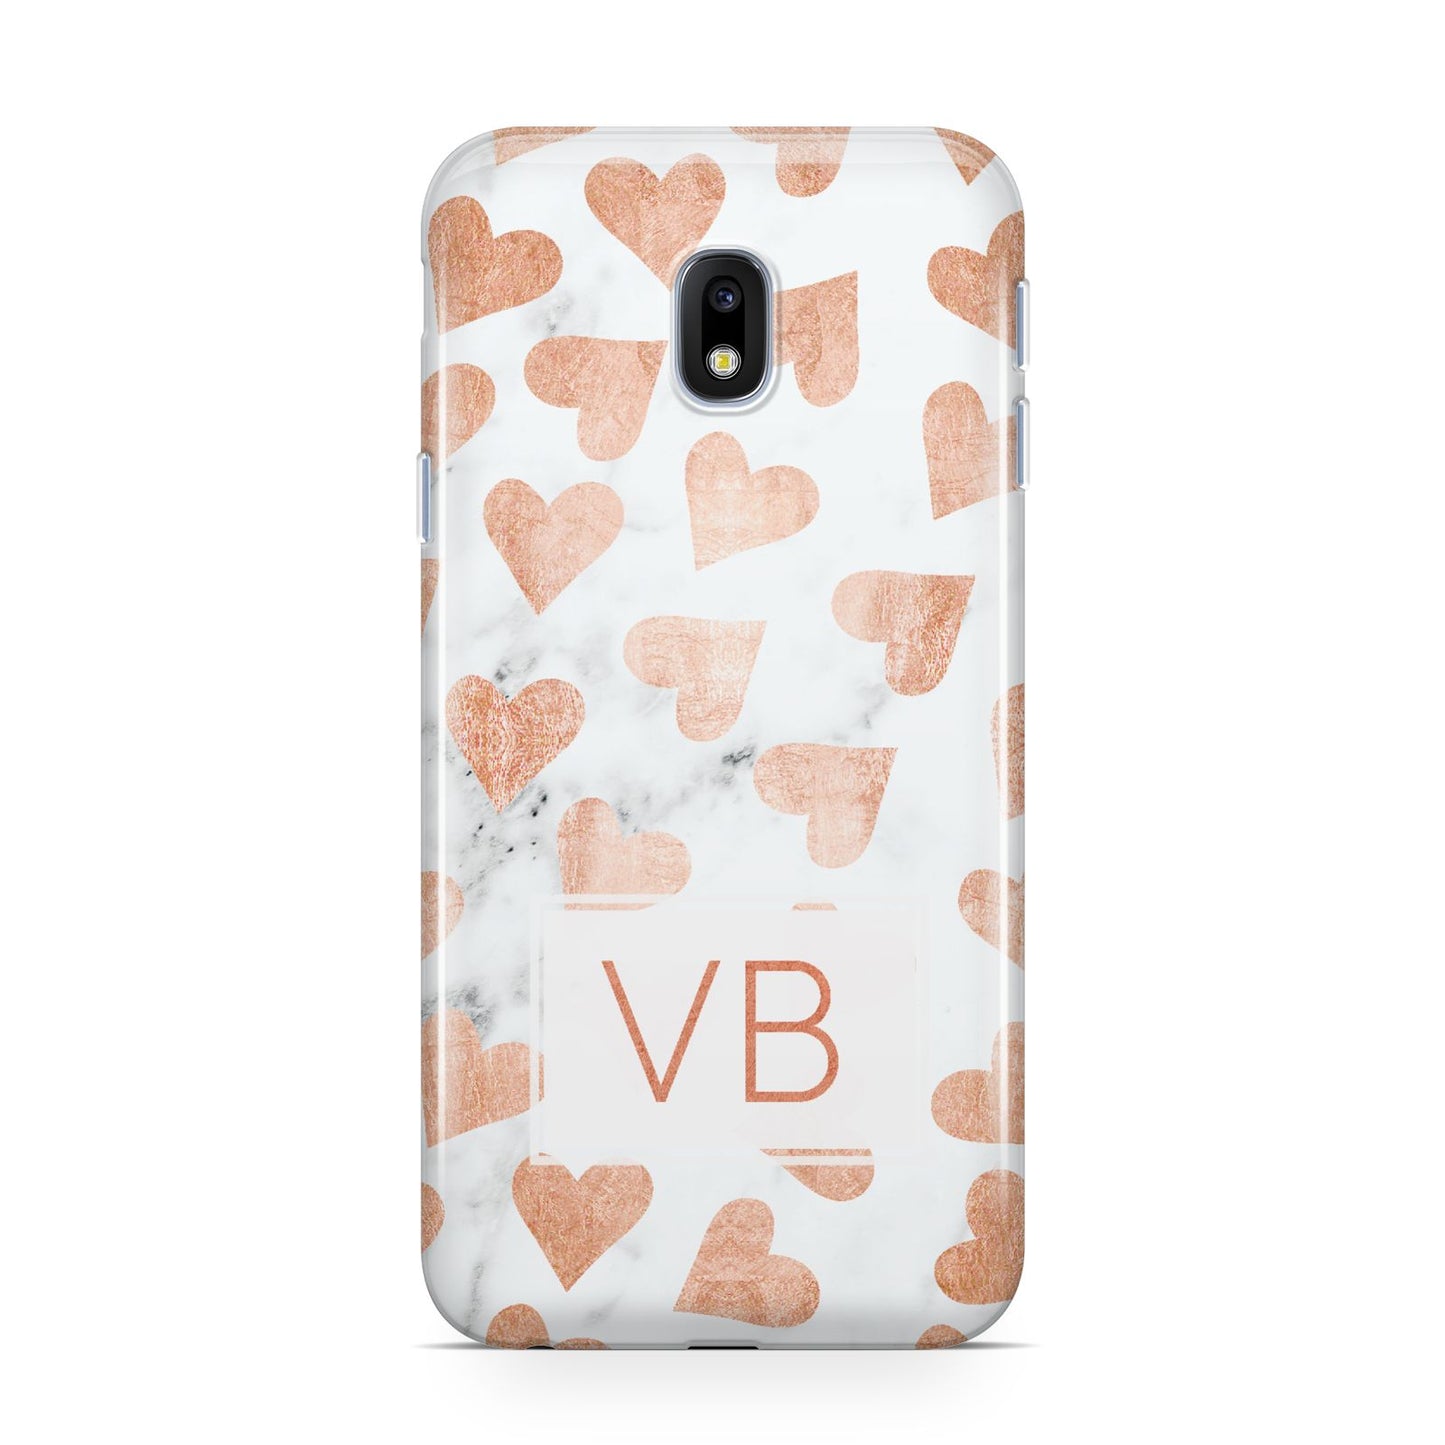 Personalised Heart Initialled Marble Samsung Galaxy J3 2017 Case